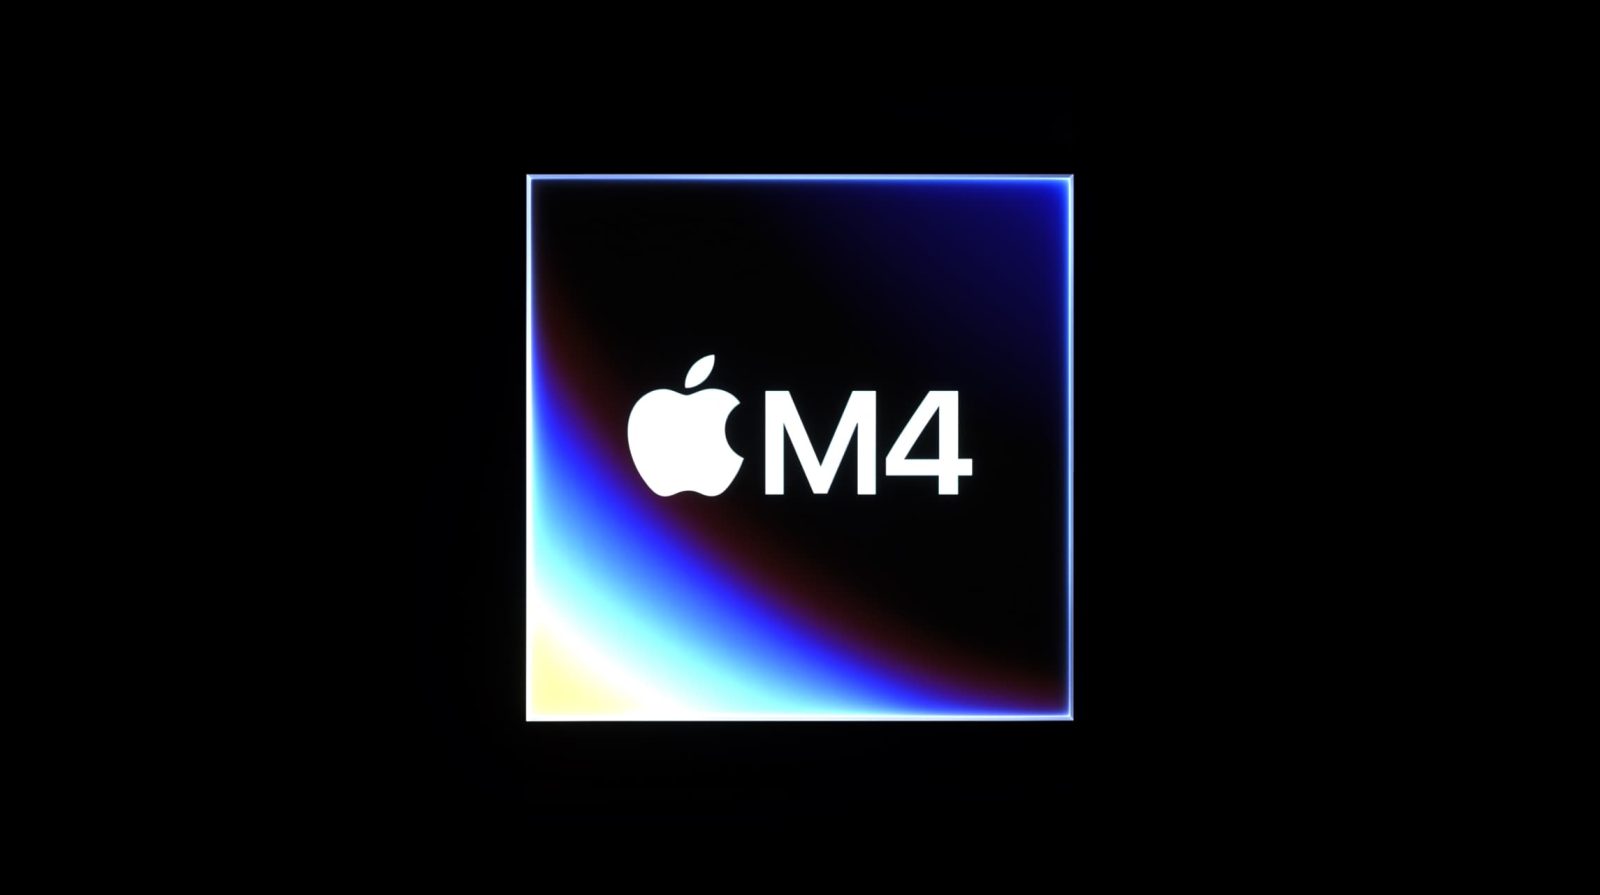 Apple unveils M4: Its first chip made for AI from the ground up